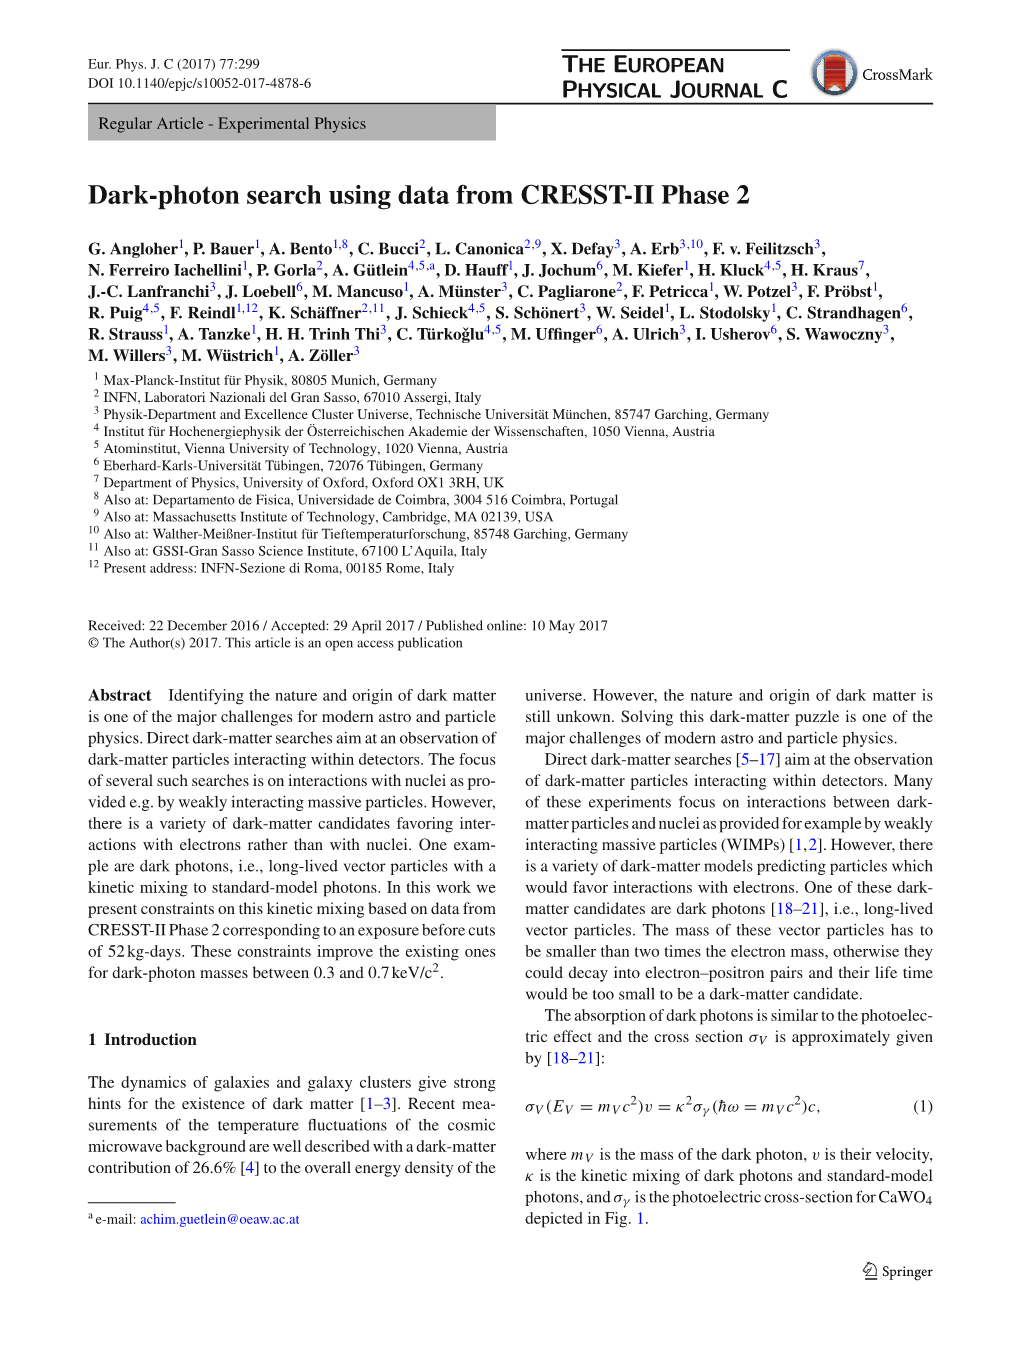 Dark-Photon Search Using Data from CRESST-II Phase 2